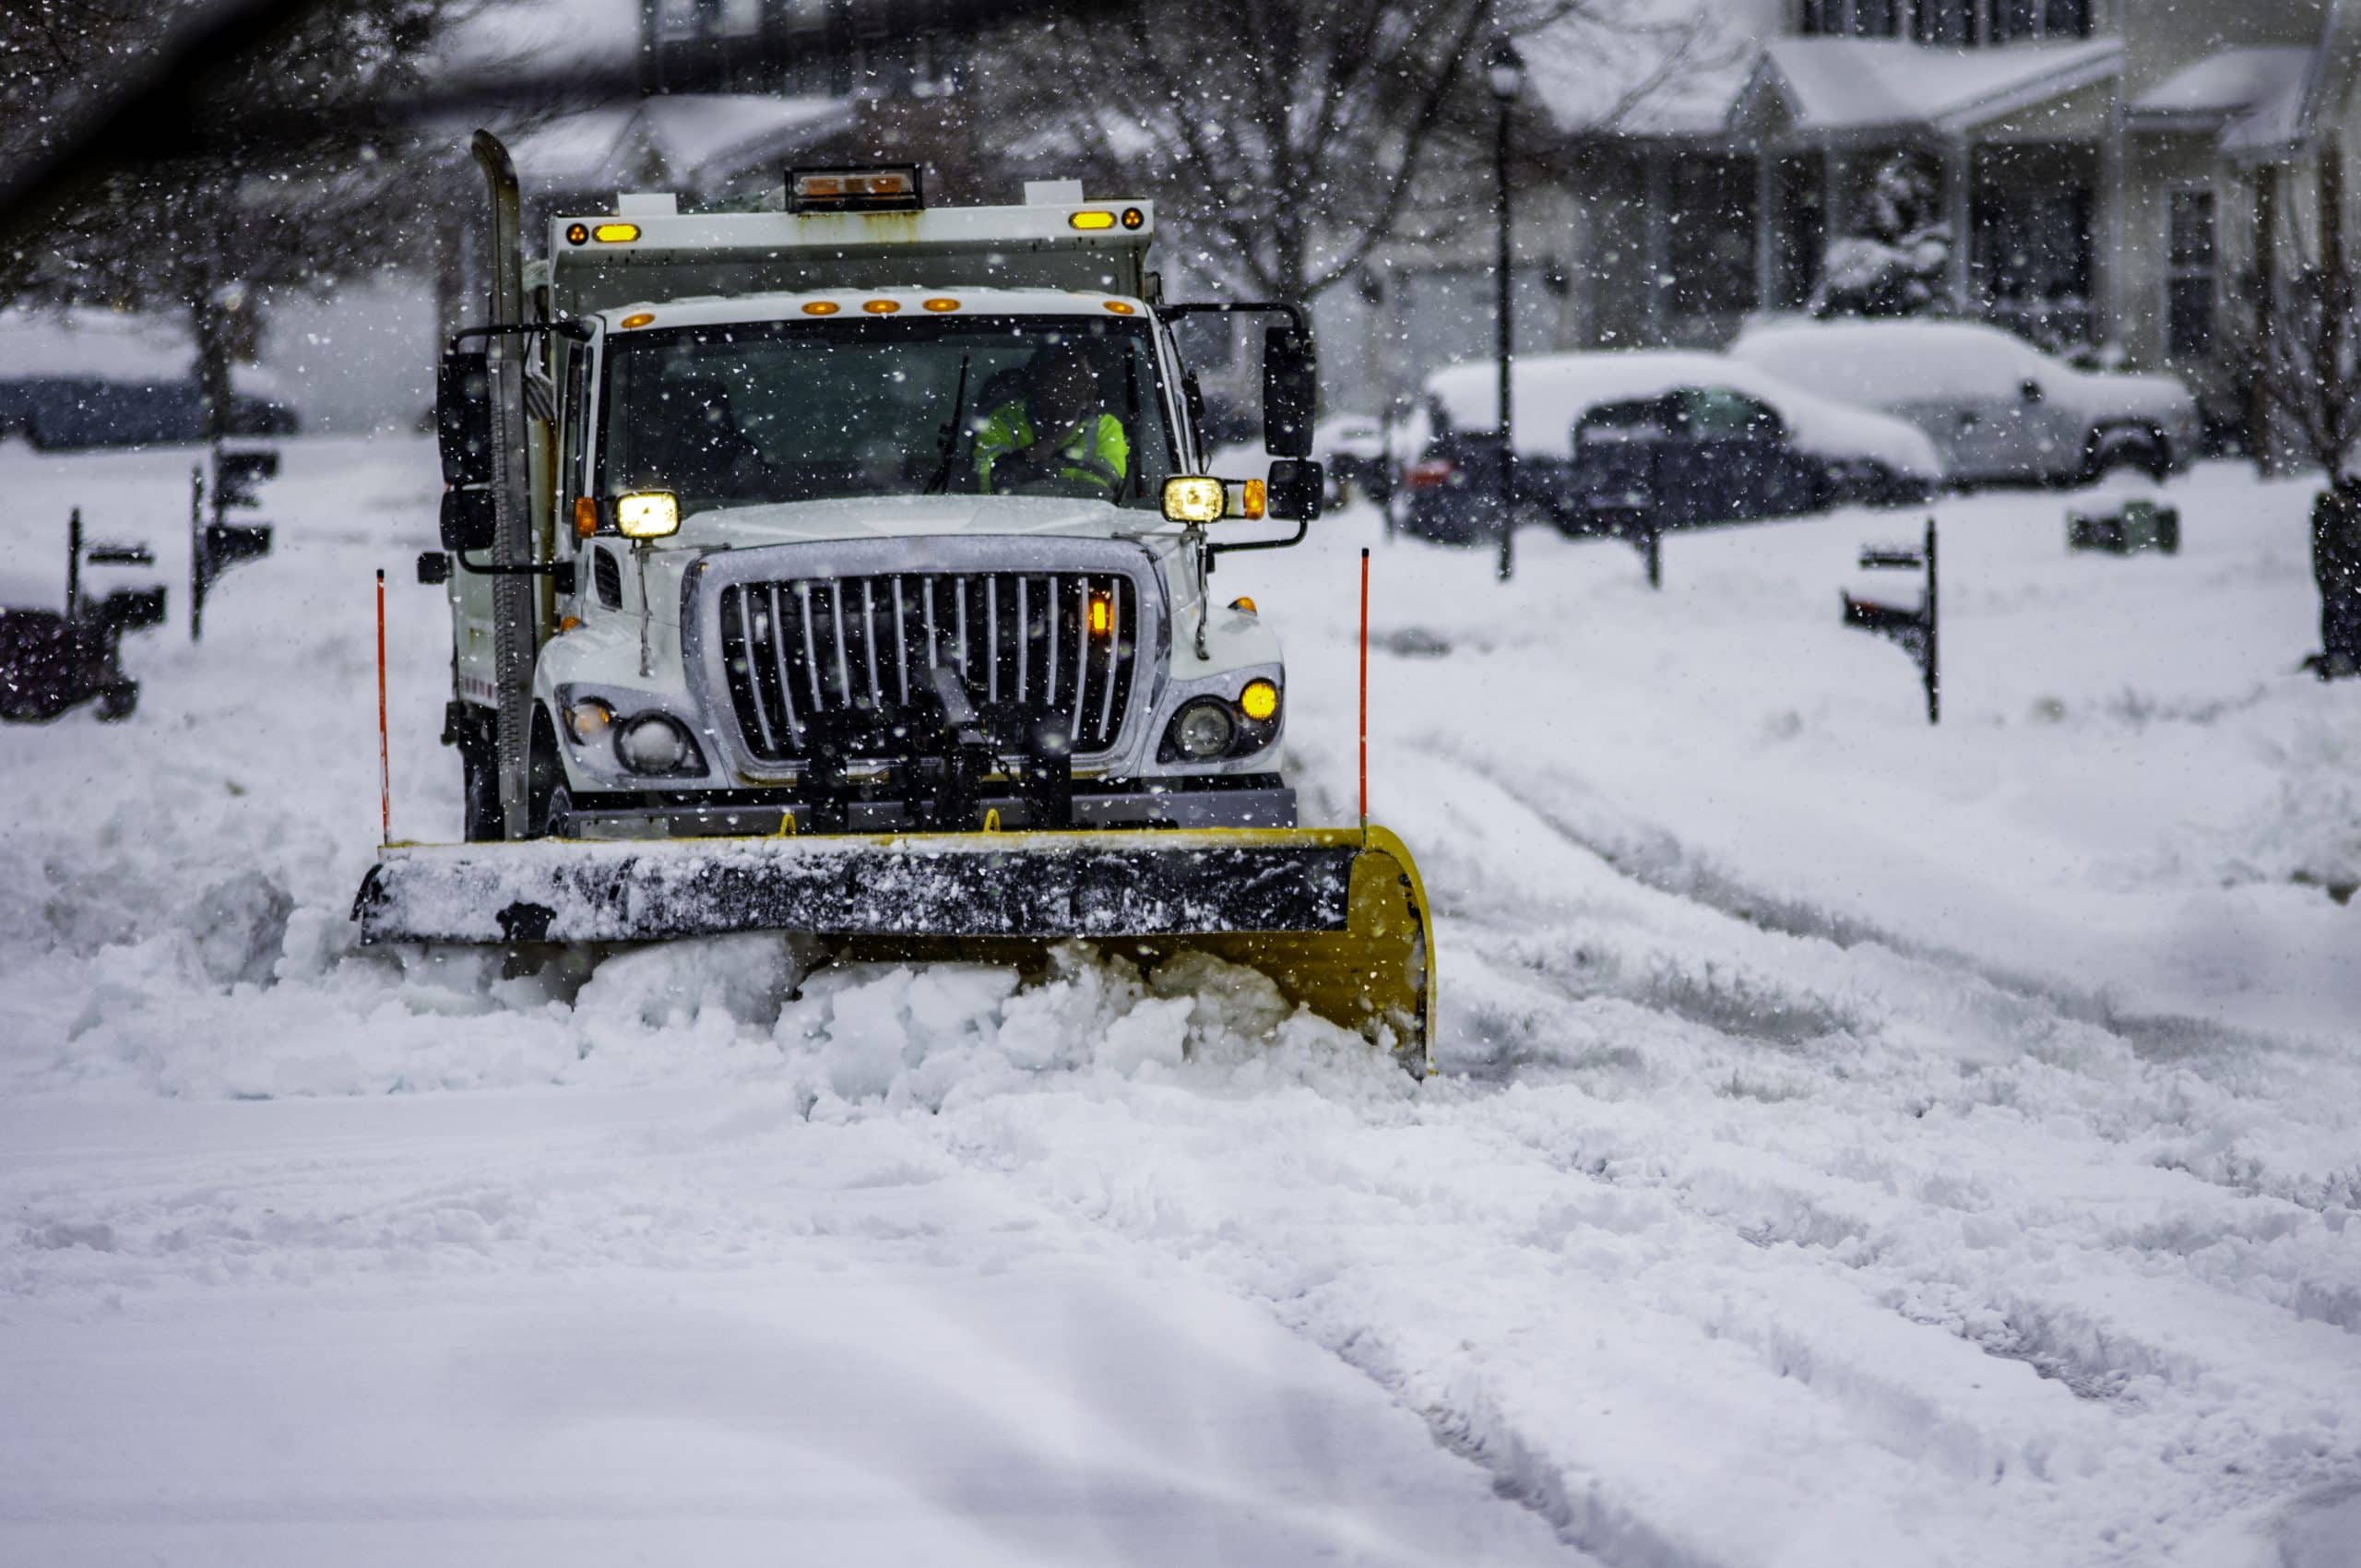 snowplow clearing streets of snow